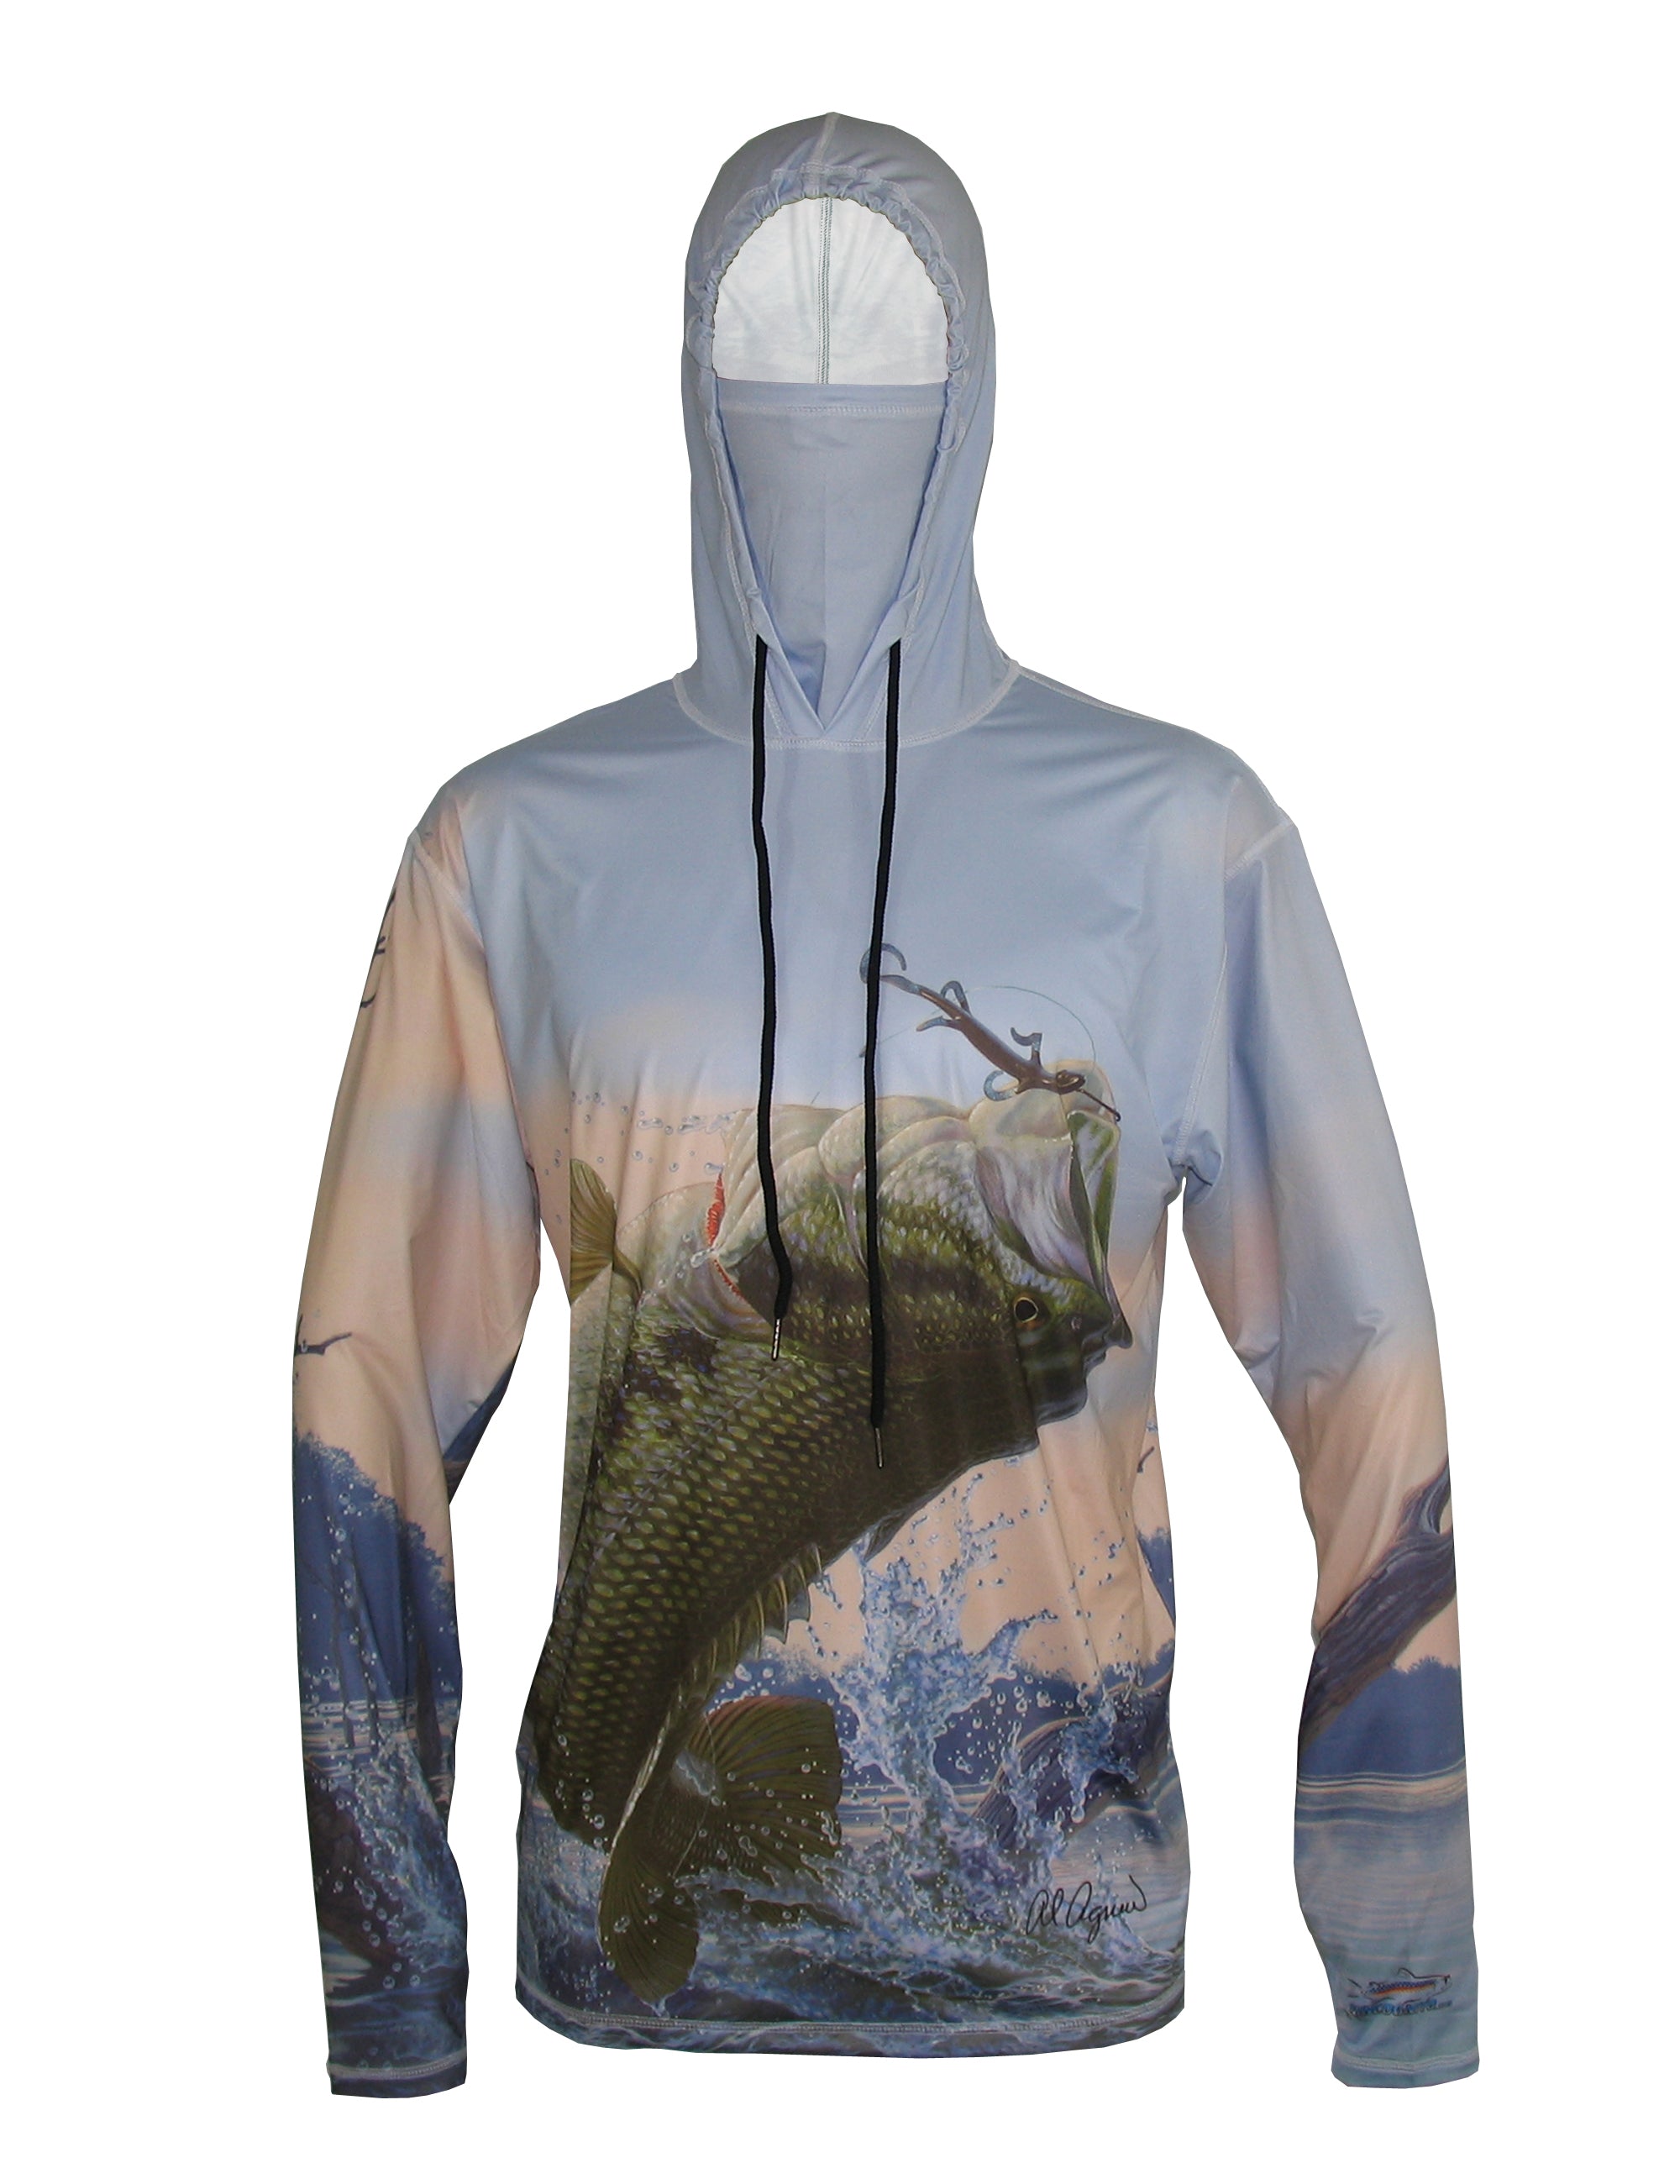 Get Out Fishing Brand Store - Get Out Fishing and Wear the Brand